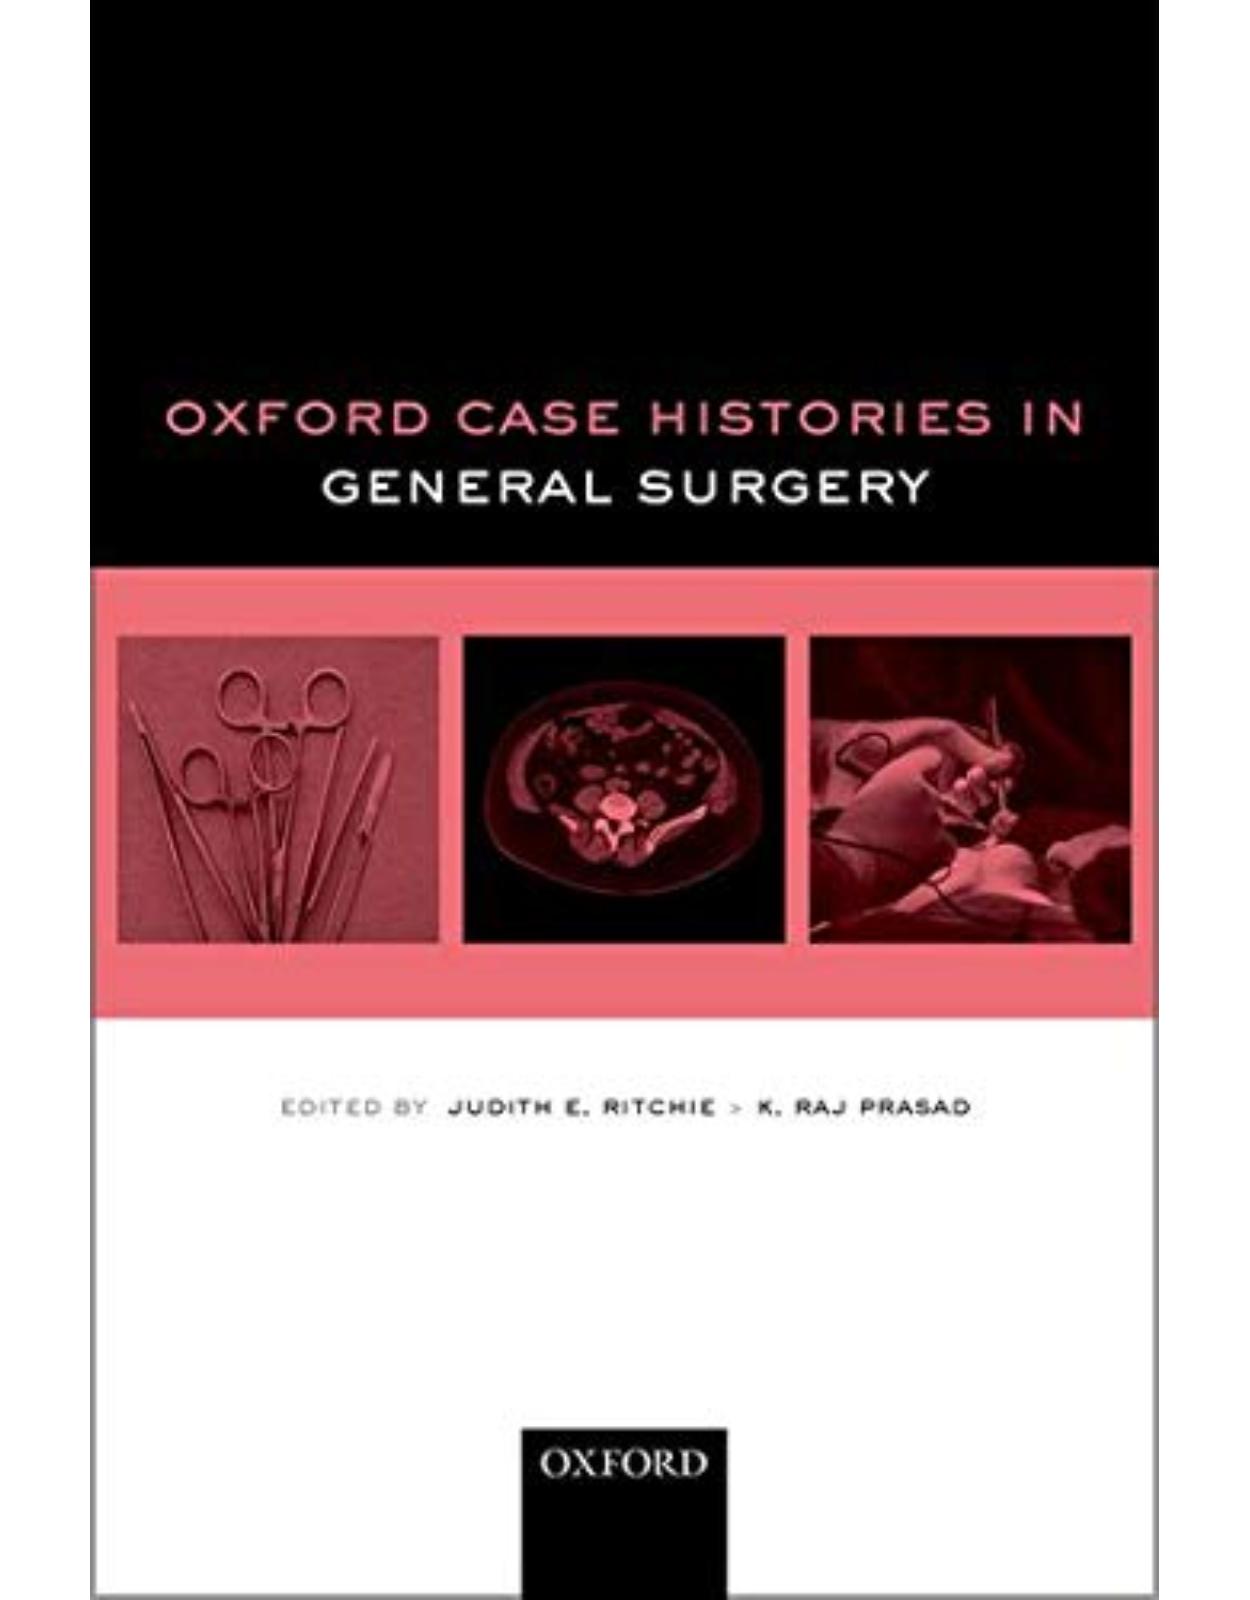 Oxford Case Histories in General Surgery